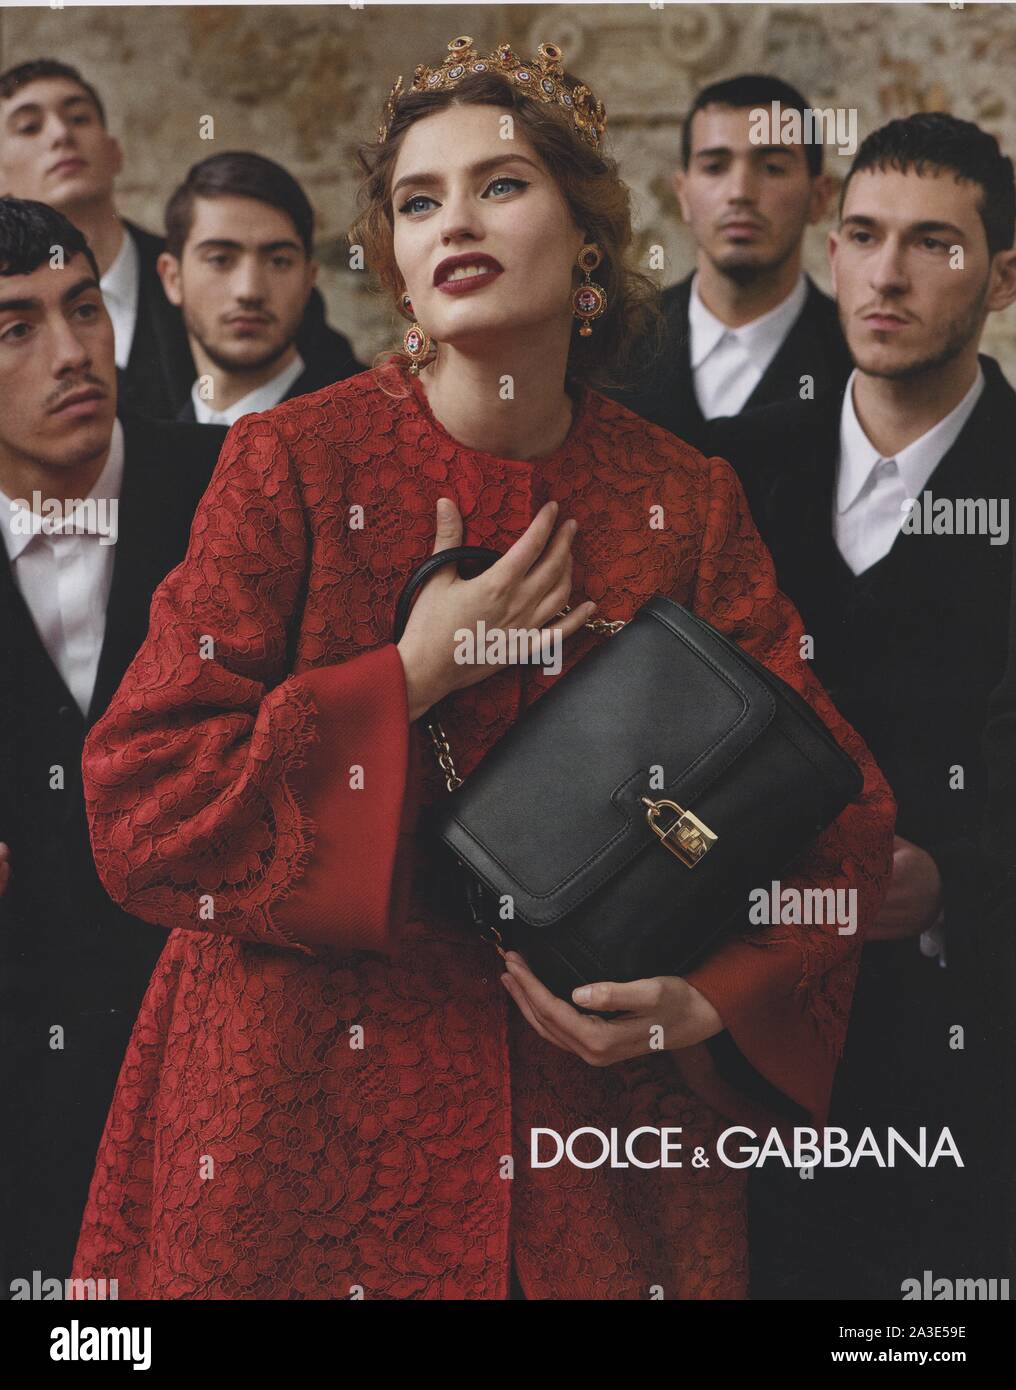 poster Dolce & Gabbana fashion house in paper magazine from 2013 year, advertisement, Dolce & Gabbana advert from 2010s Stock Photo - Alamy